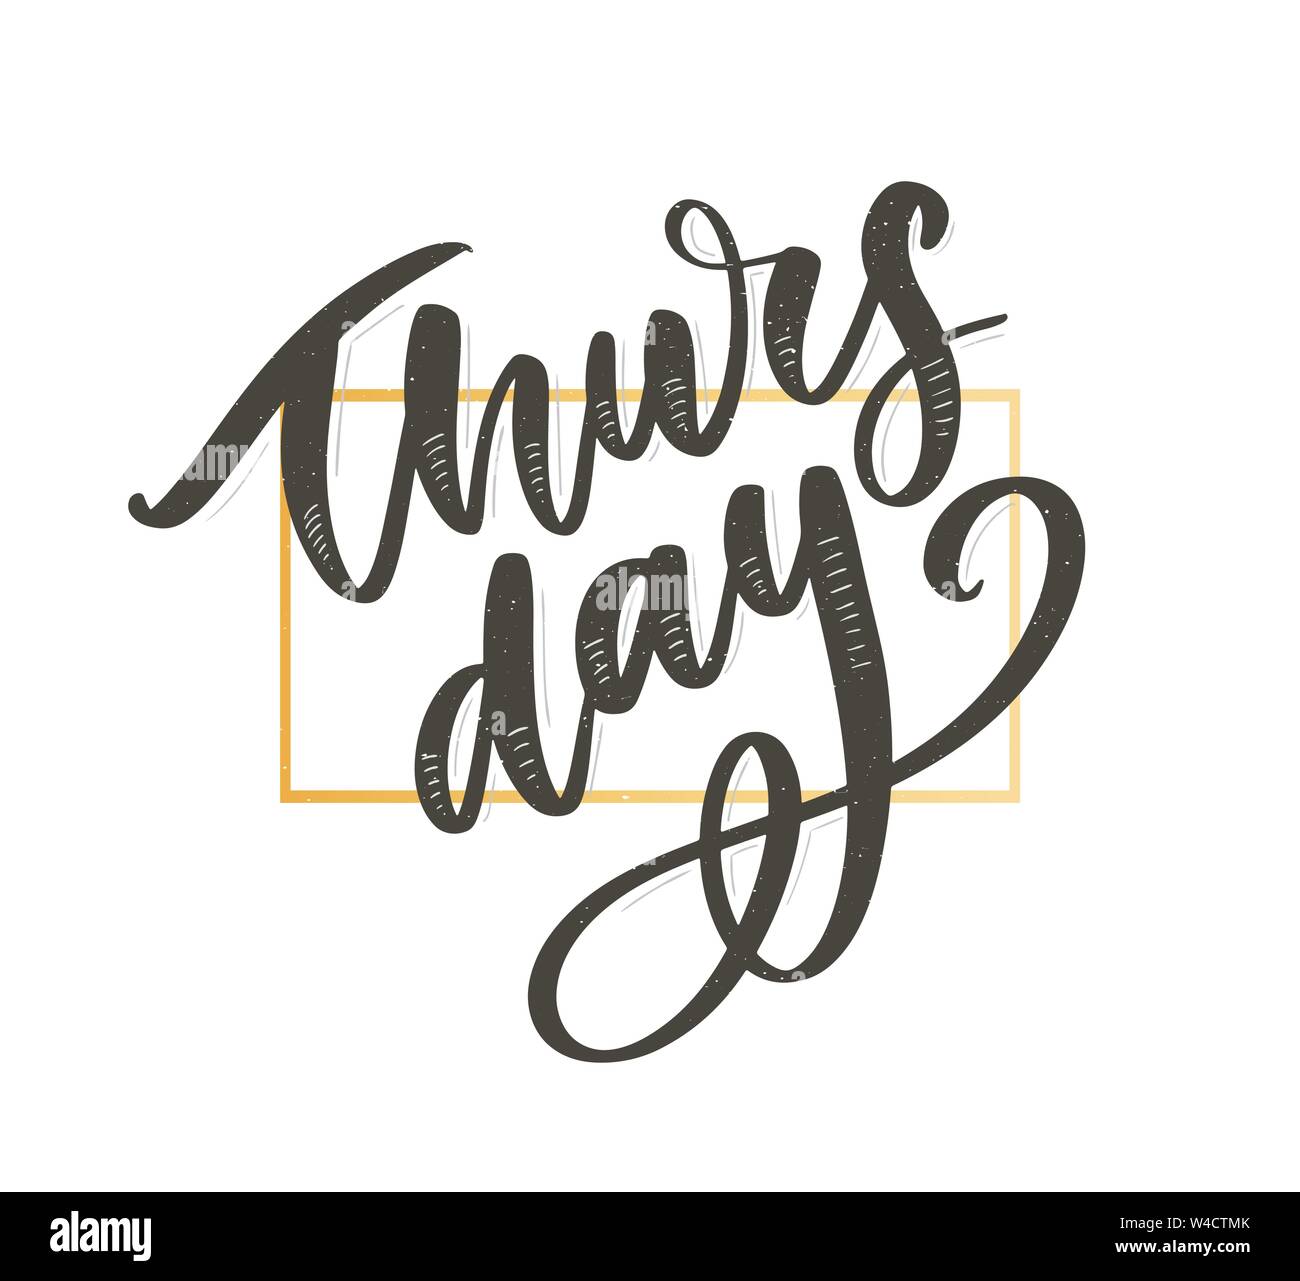 Happy Thursday - Fireworks - Today, Day, weekdays, calender Lettering Handwritten Stock Vector